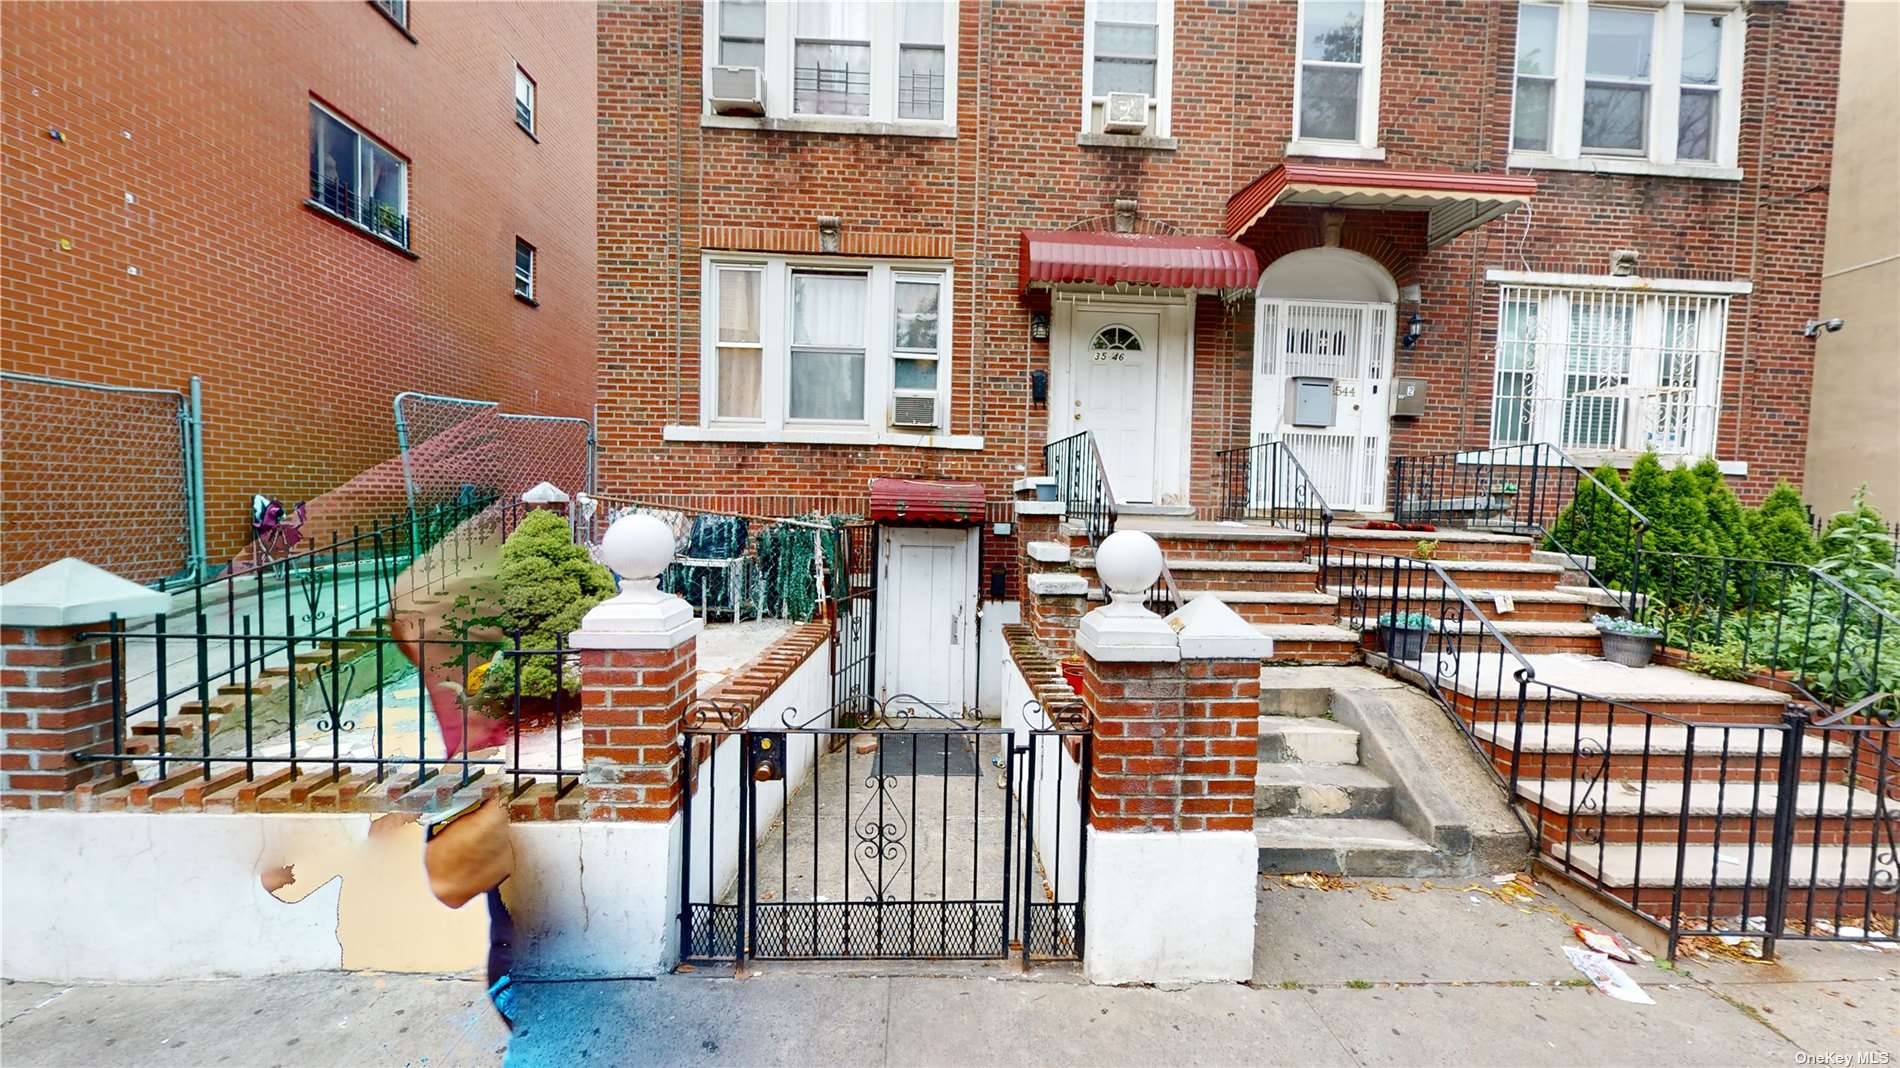 Big building with Basement legal for Offices, 3 Bedrooms apartment in 1st fl, 4 bedroom apartment on 2nd Floor Can be delivered Vacant, 1 Block to Roosevelt Ave.